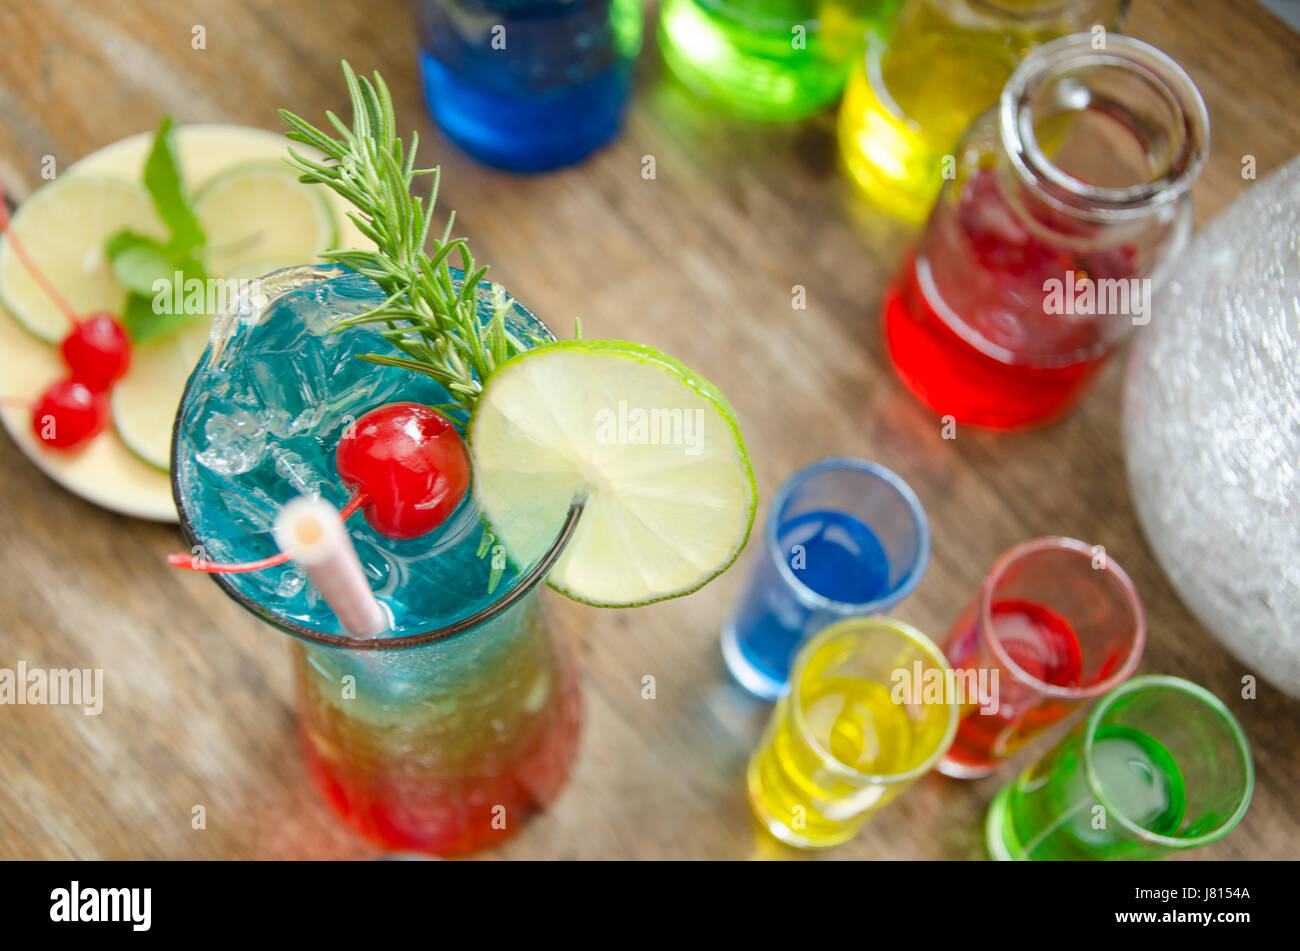 Colorful Glass of rainbow fruit juice and ingredients on the wood table. Stock Photo